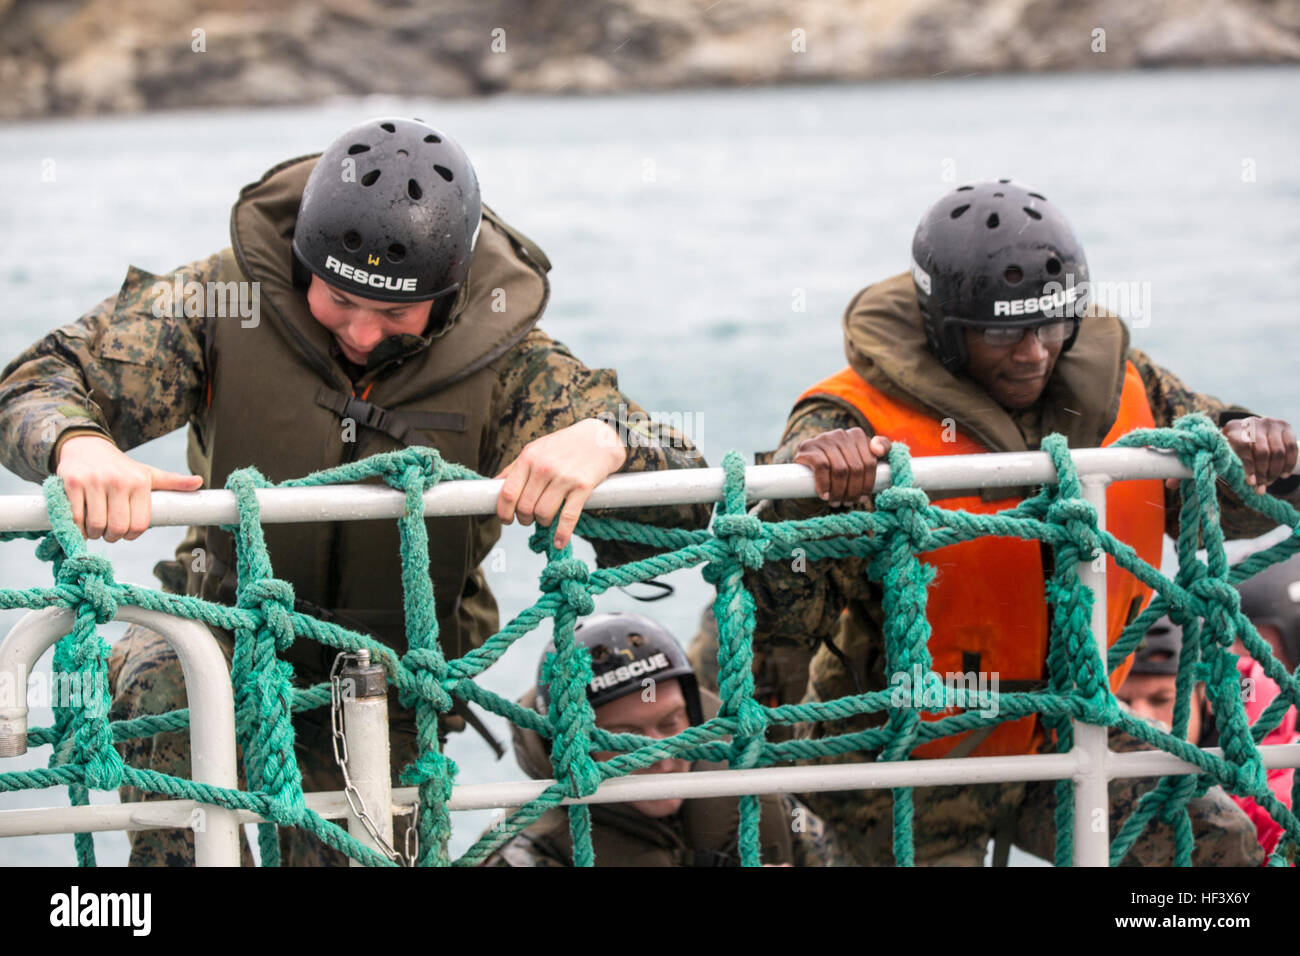 U.S. Marine Lance Cpl. Jeremy L. Fultz, (left), mortar man, and Lance Cpl. Jeremiah D. Patterson, (right), rifleman, both with Bravo company, 1st Battalion, 8th Marine Regiment, Special Purpose Marine Air-Ground Task Force-Crisis Response-Africa climb from a zodiac rescue boat onto a passenger transport boat during a French Commando boat evacuation training event in Collioure, France, Apr. 8, 2016. The French Commando training allows SPMAGTF-CR-AF Marines to train alongside French forces and share knowledge as well as build a partnership that will help enable the crisis response mission. (U.S. Stock Photo